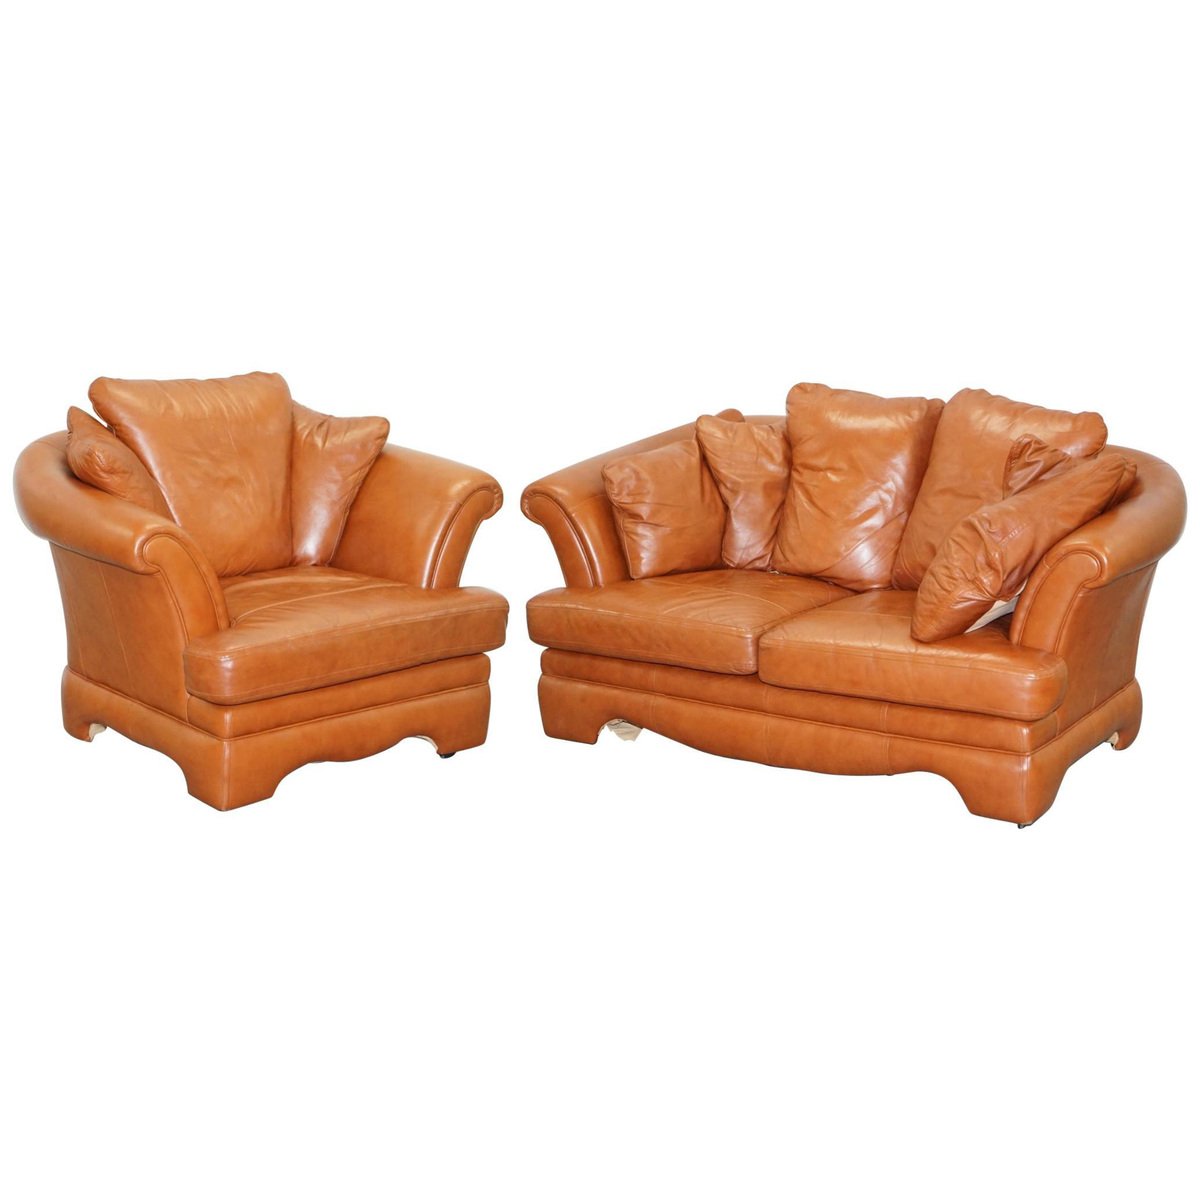 small aged tan brown leather sofa matching armchair set of 2 GZP-1006580